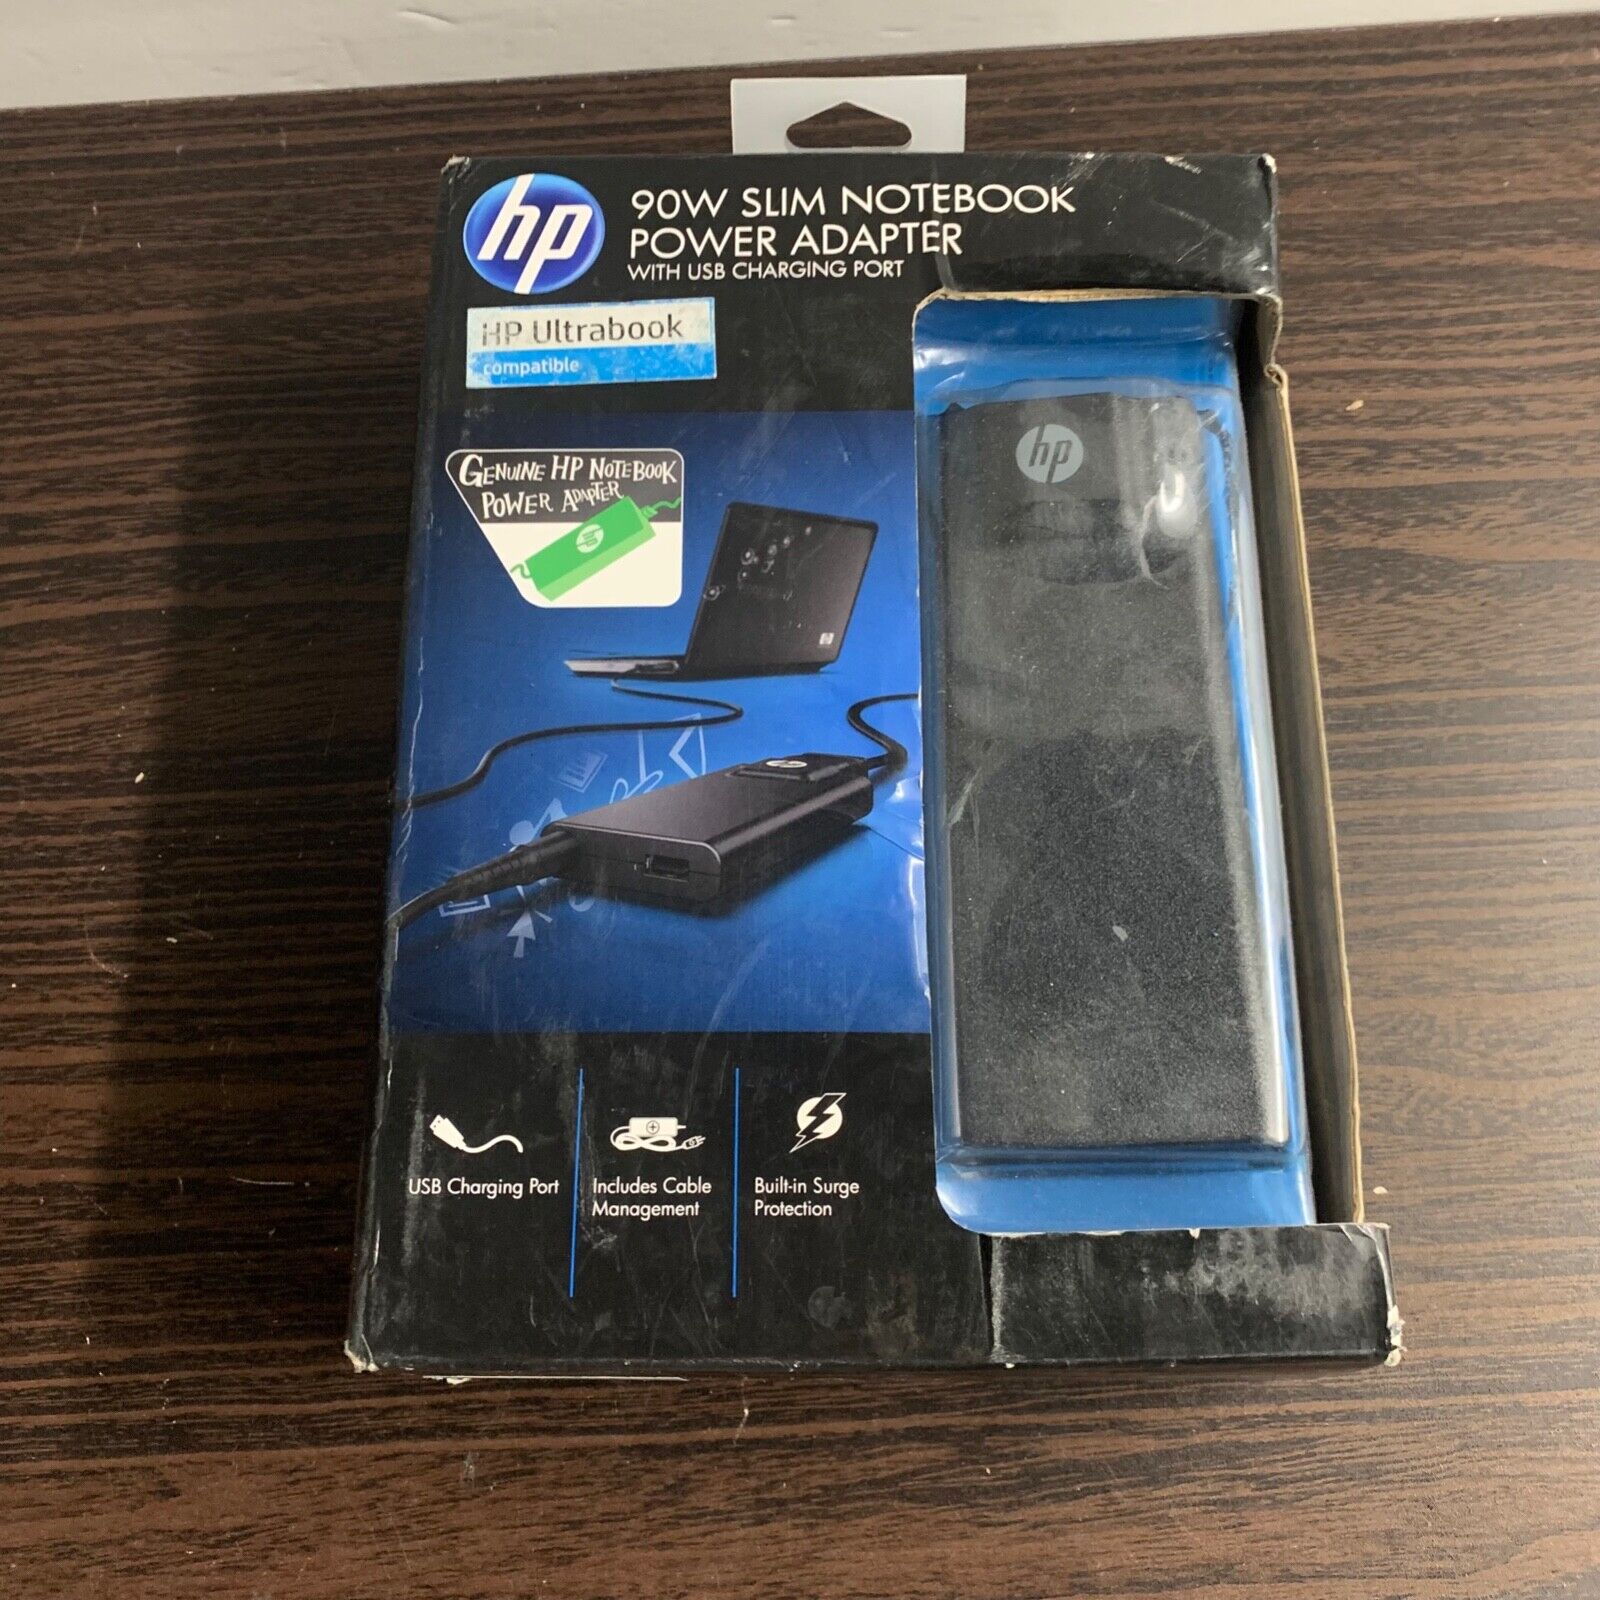 New in Box HP 90W Slim Notebook Power Adapter with USB Charging Port